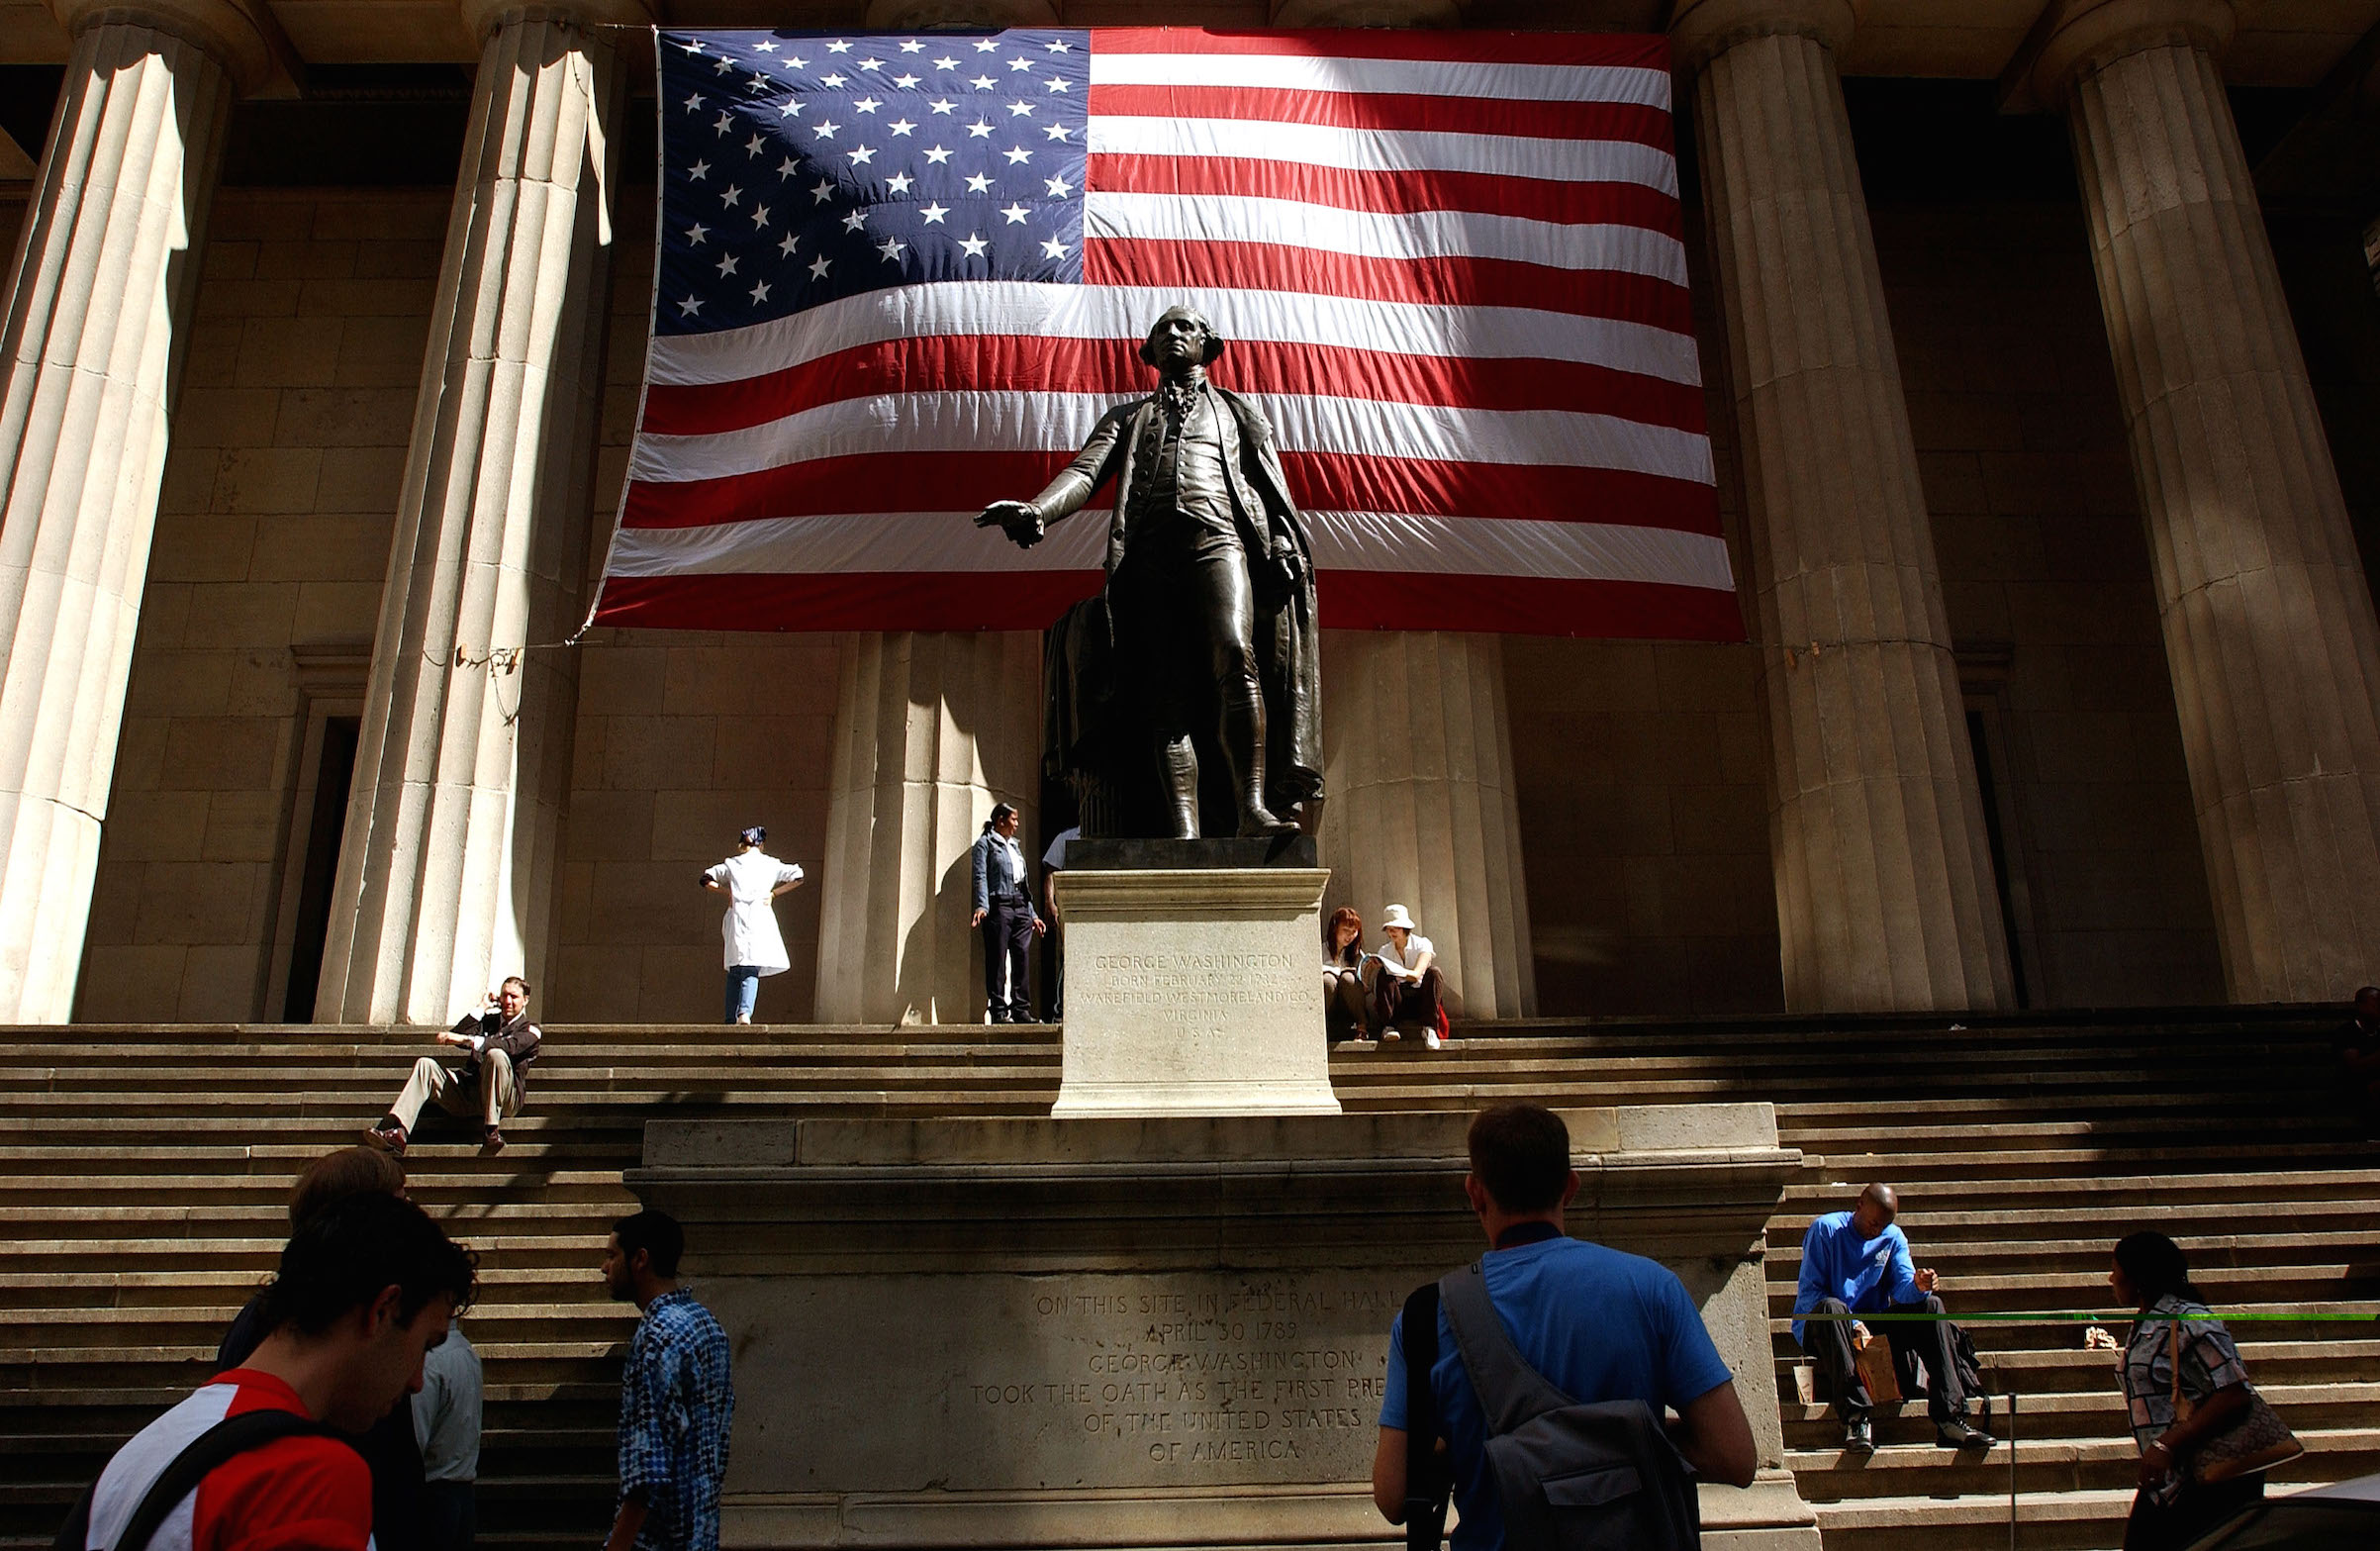 Pedestrians walk around the George Washington statue in front of Federal Hall Sept. 5, 2002 in New York City. (Spencer Platt—Getty Images)